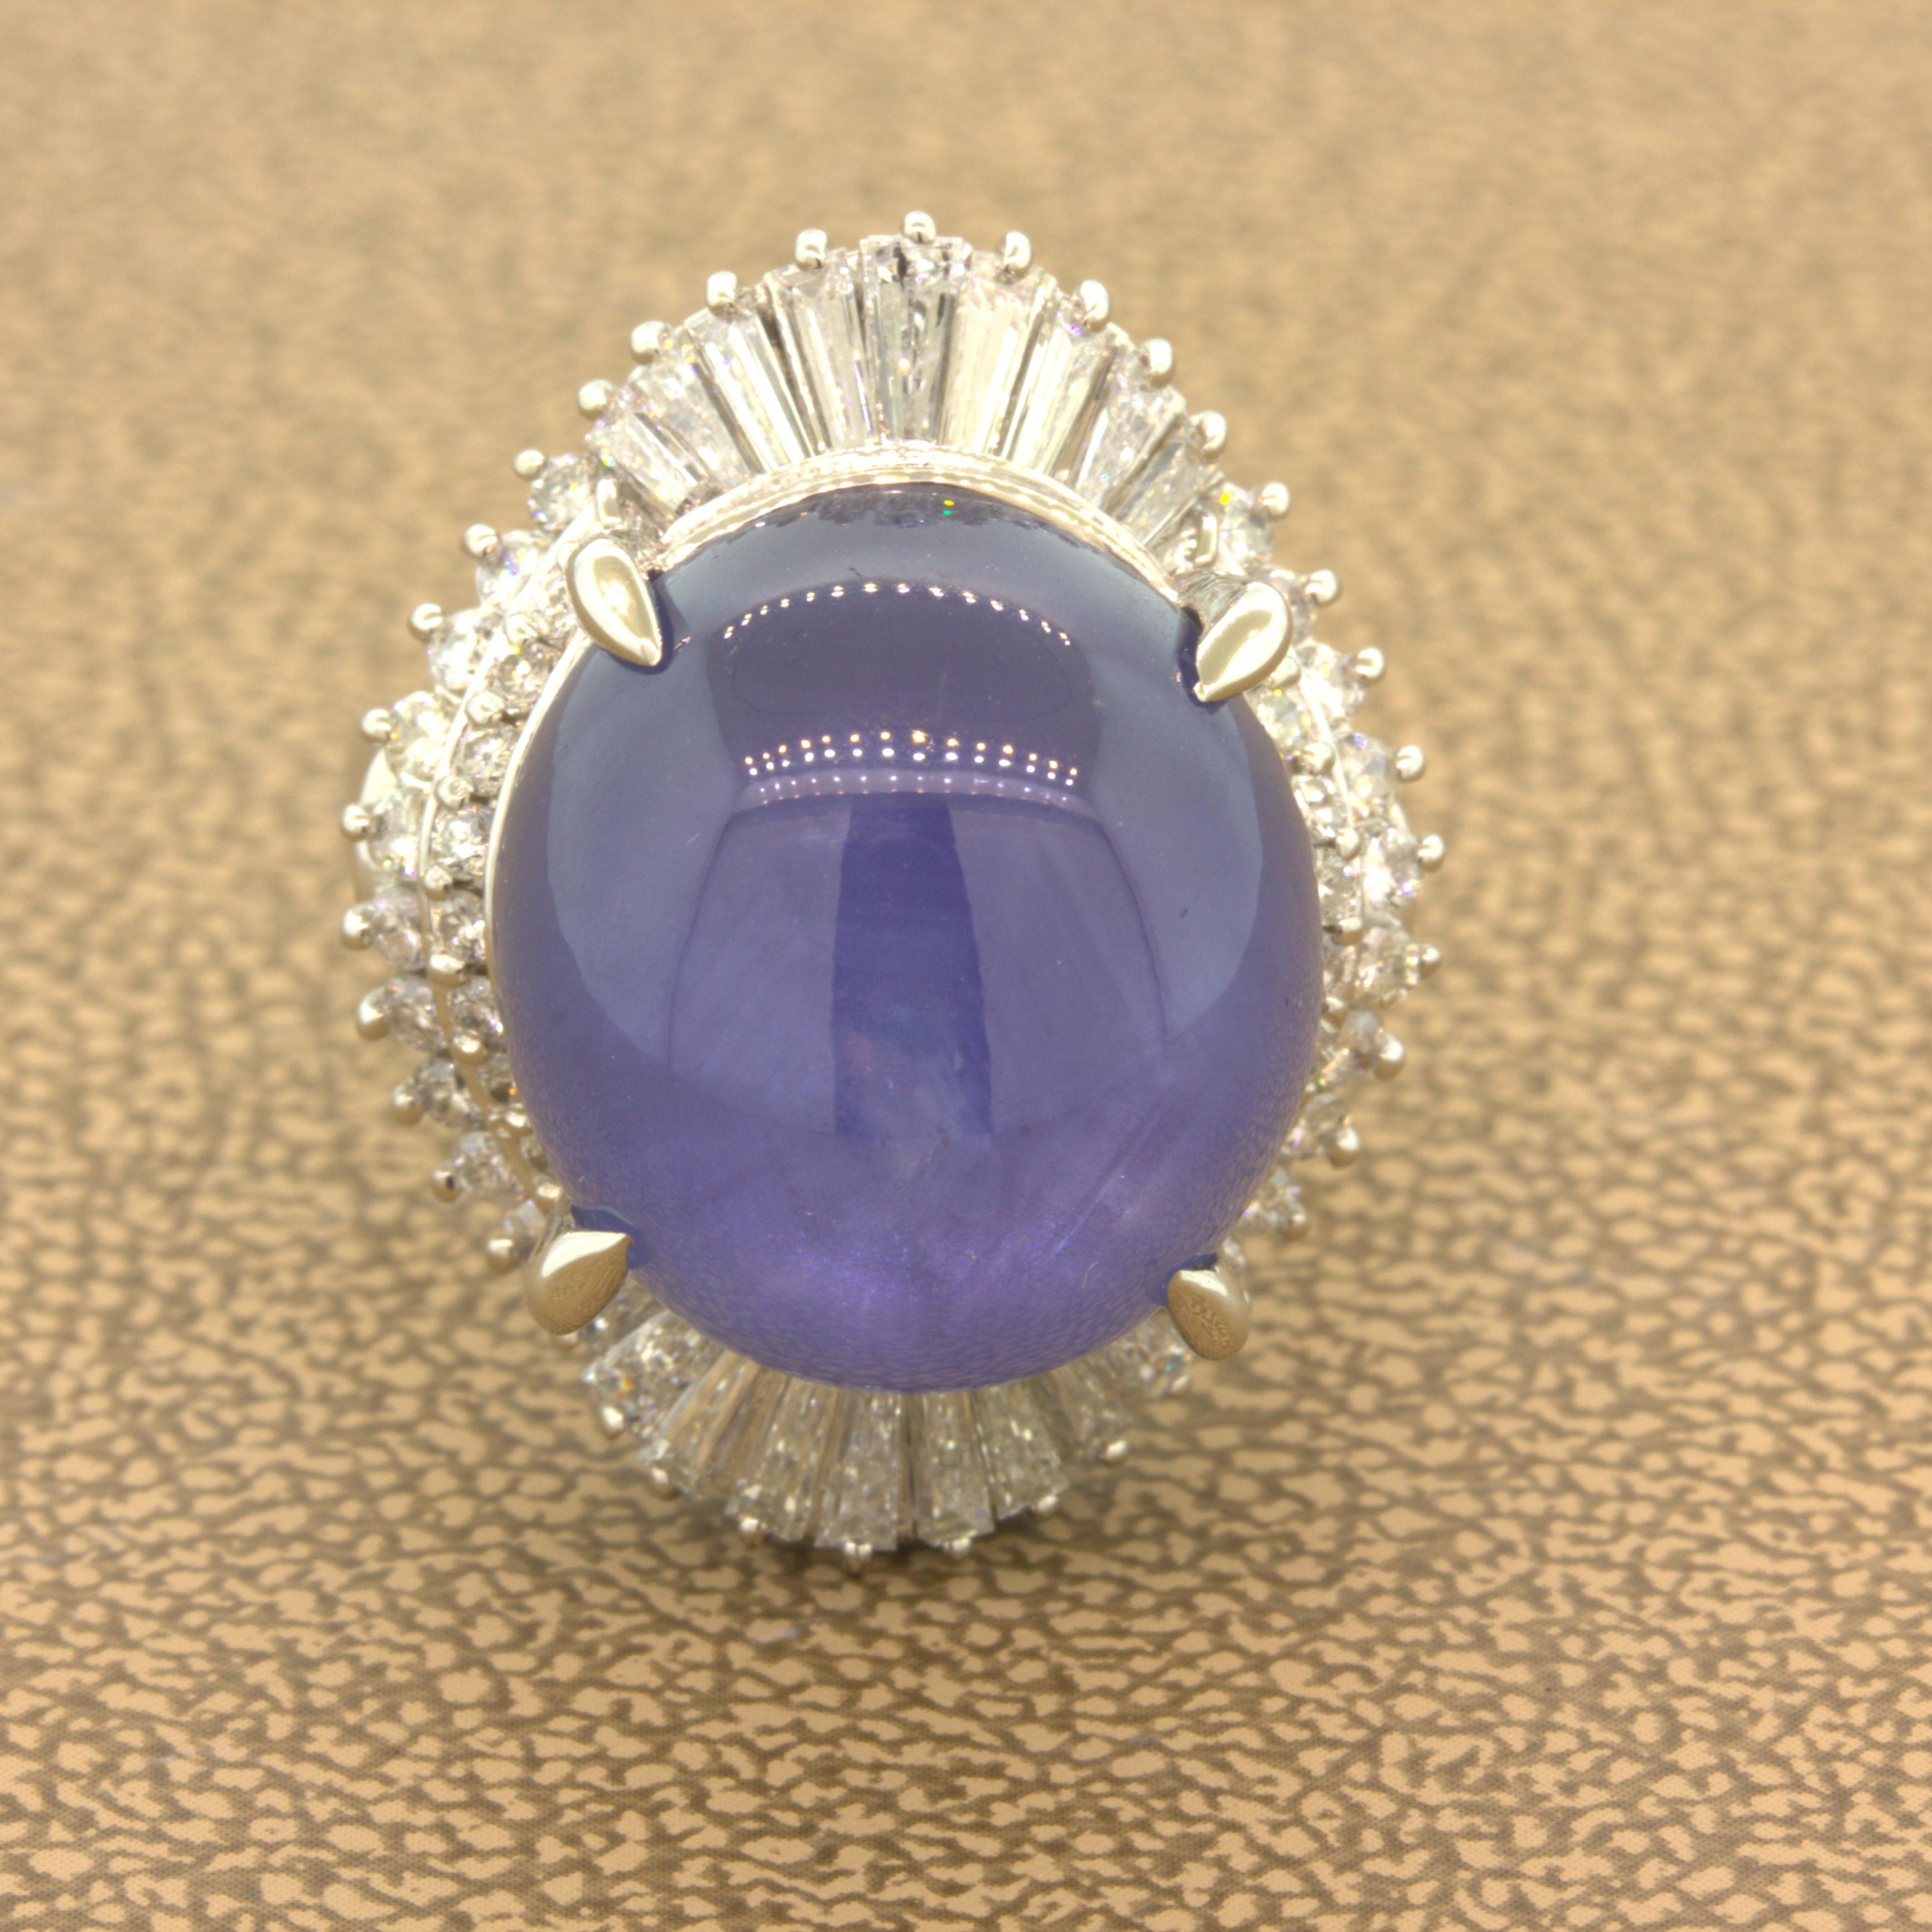 A large and impressive unheated star sapphire takes center stage! It weighs a very impressive 26.75 carats and has an even soft blue color that glows in the light. Adding to that, it has a strong 6-rayed star with long full legs which is perfectly